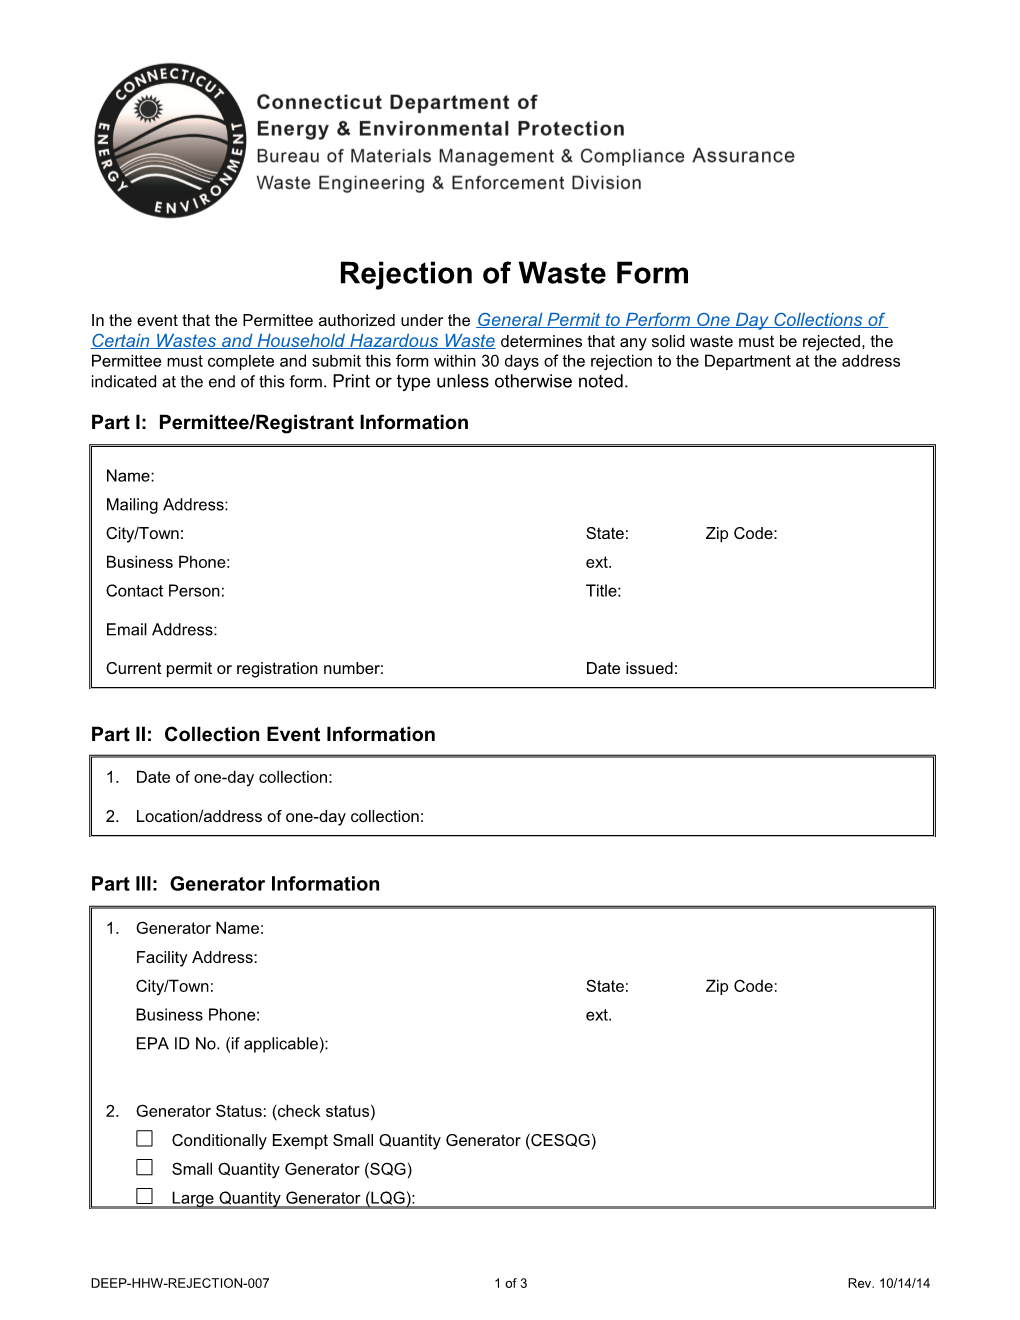 Rejection of Waste Form: Household Hazardous Waste/Conditionally Exempt Small Quantity